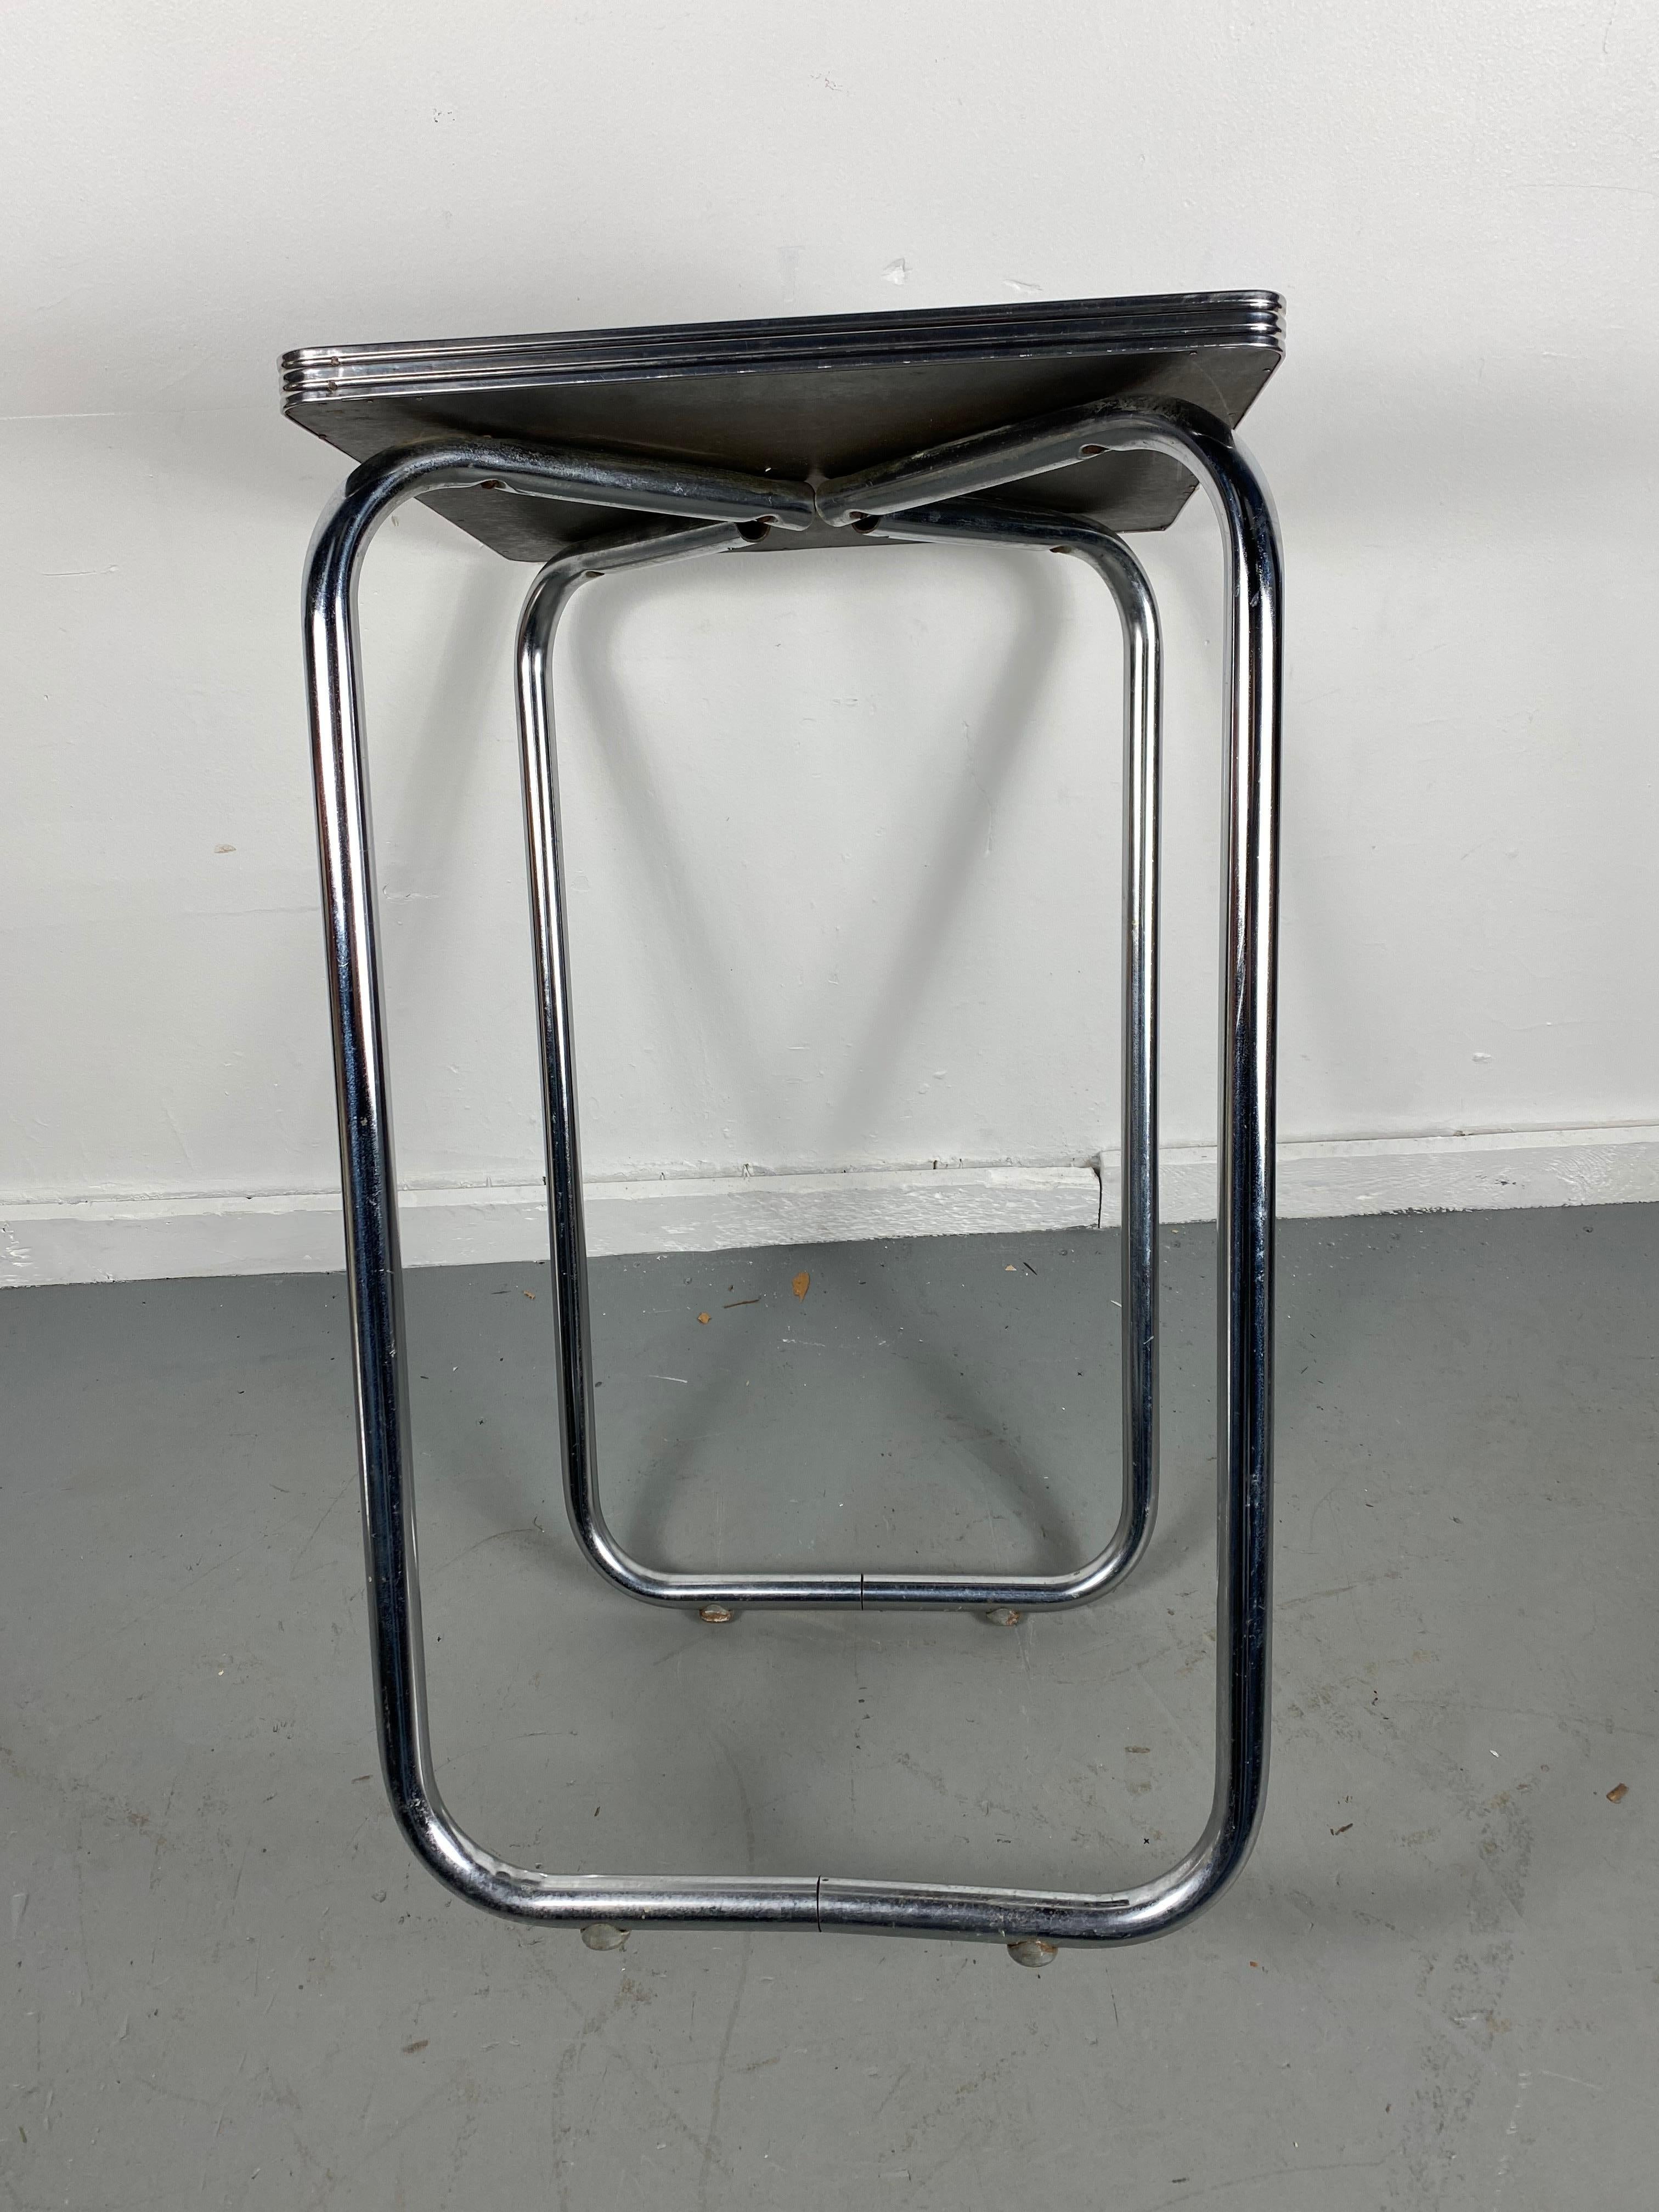 Unusual Bauhaus Style Black and Tubular Chrome Table / Stand / Wolfgang Hoffmann For Sale 3